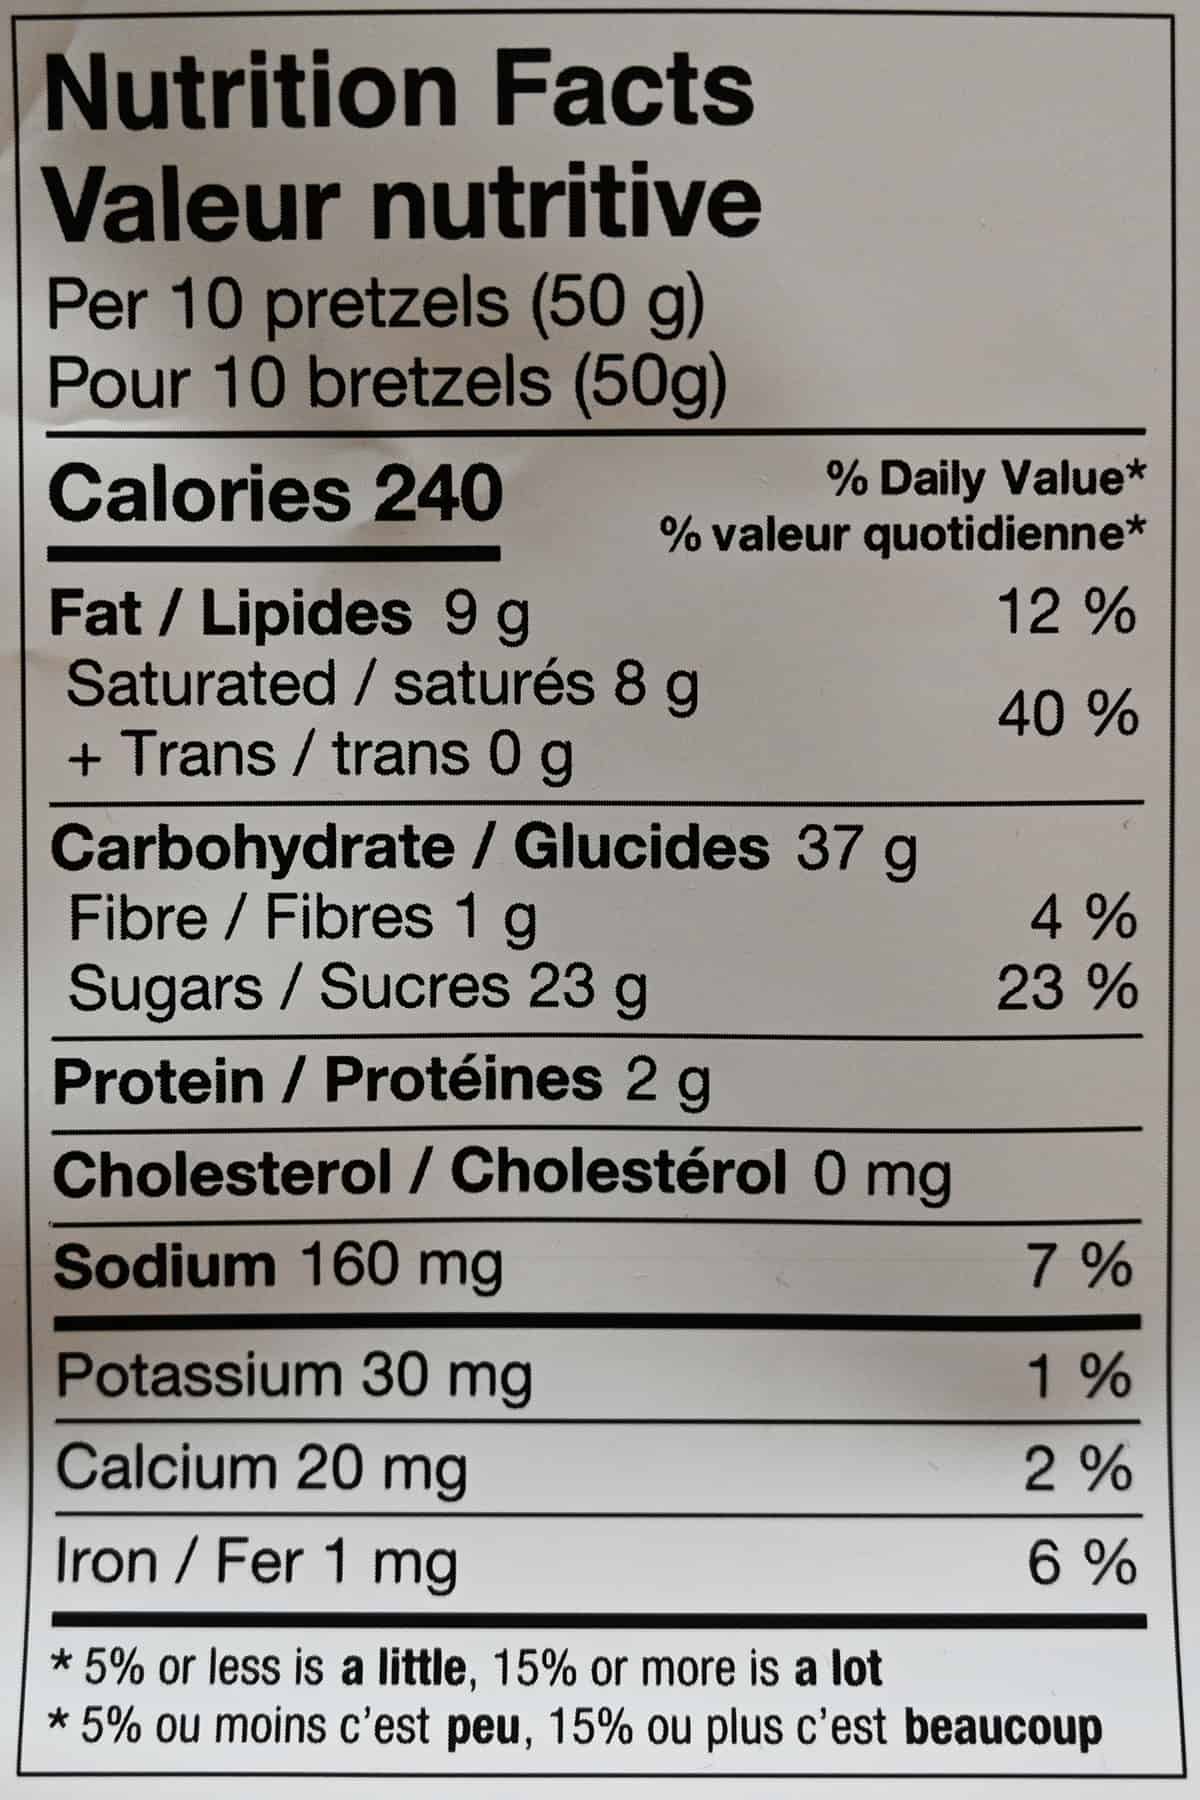 Image of the nutrition facts label for the pretzels from the bag.